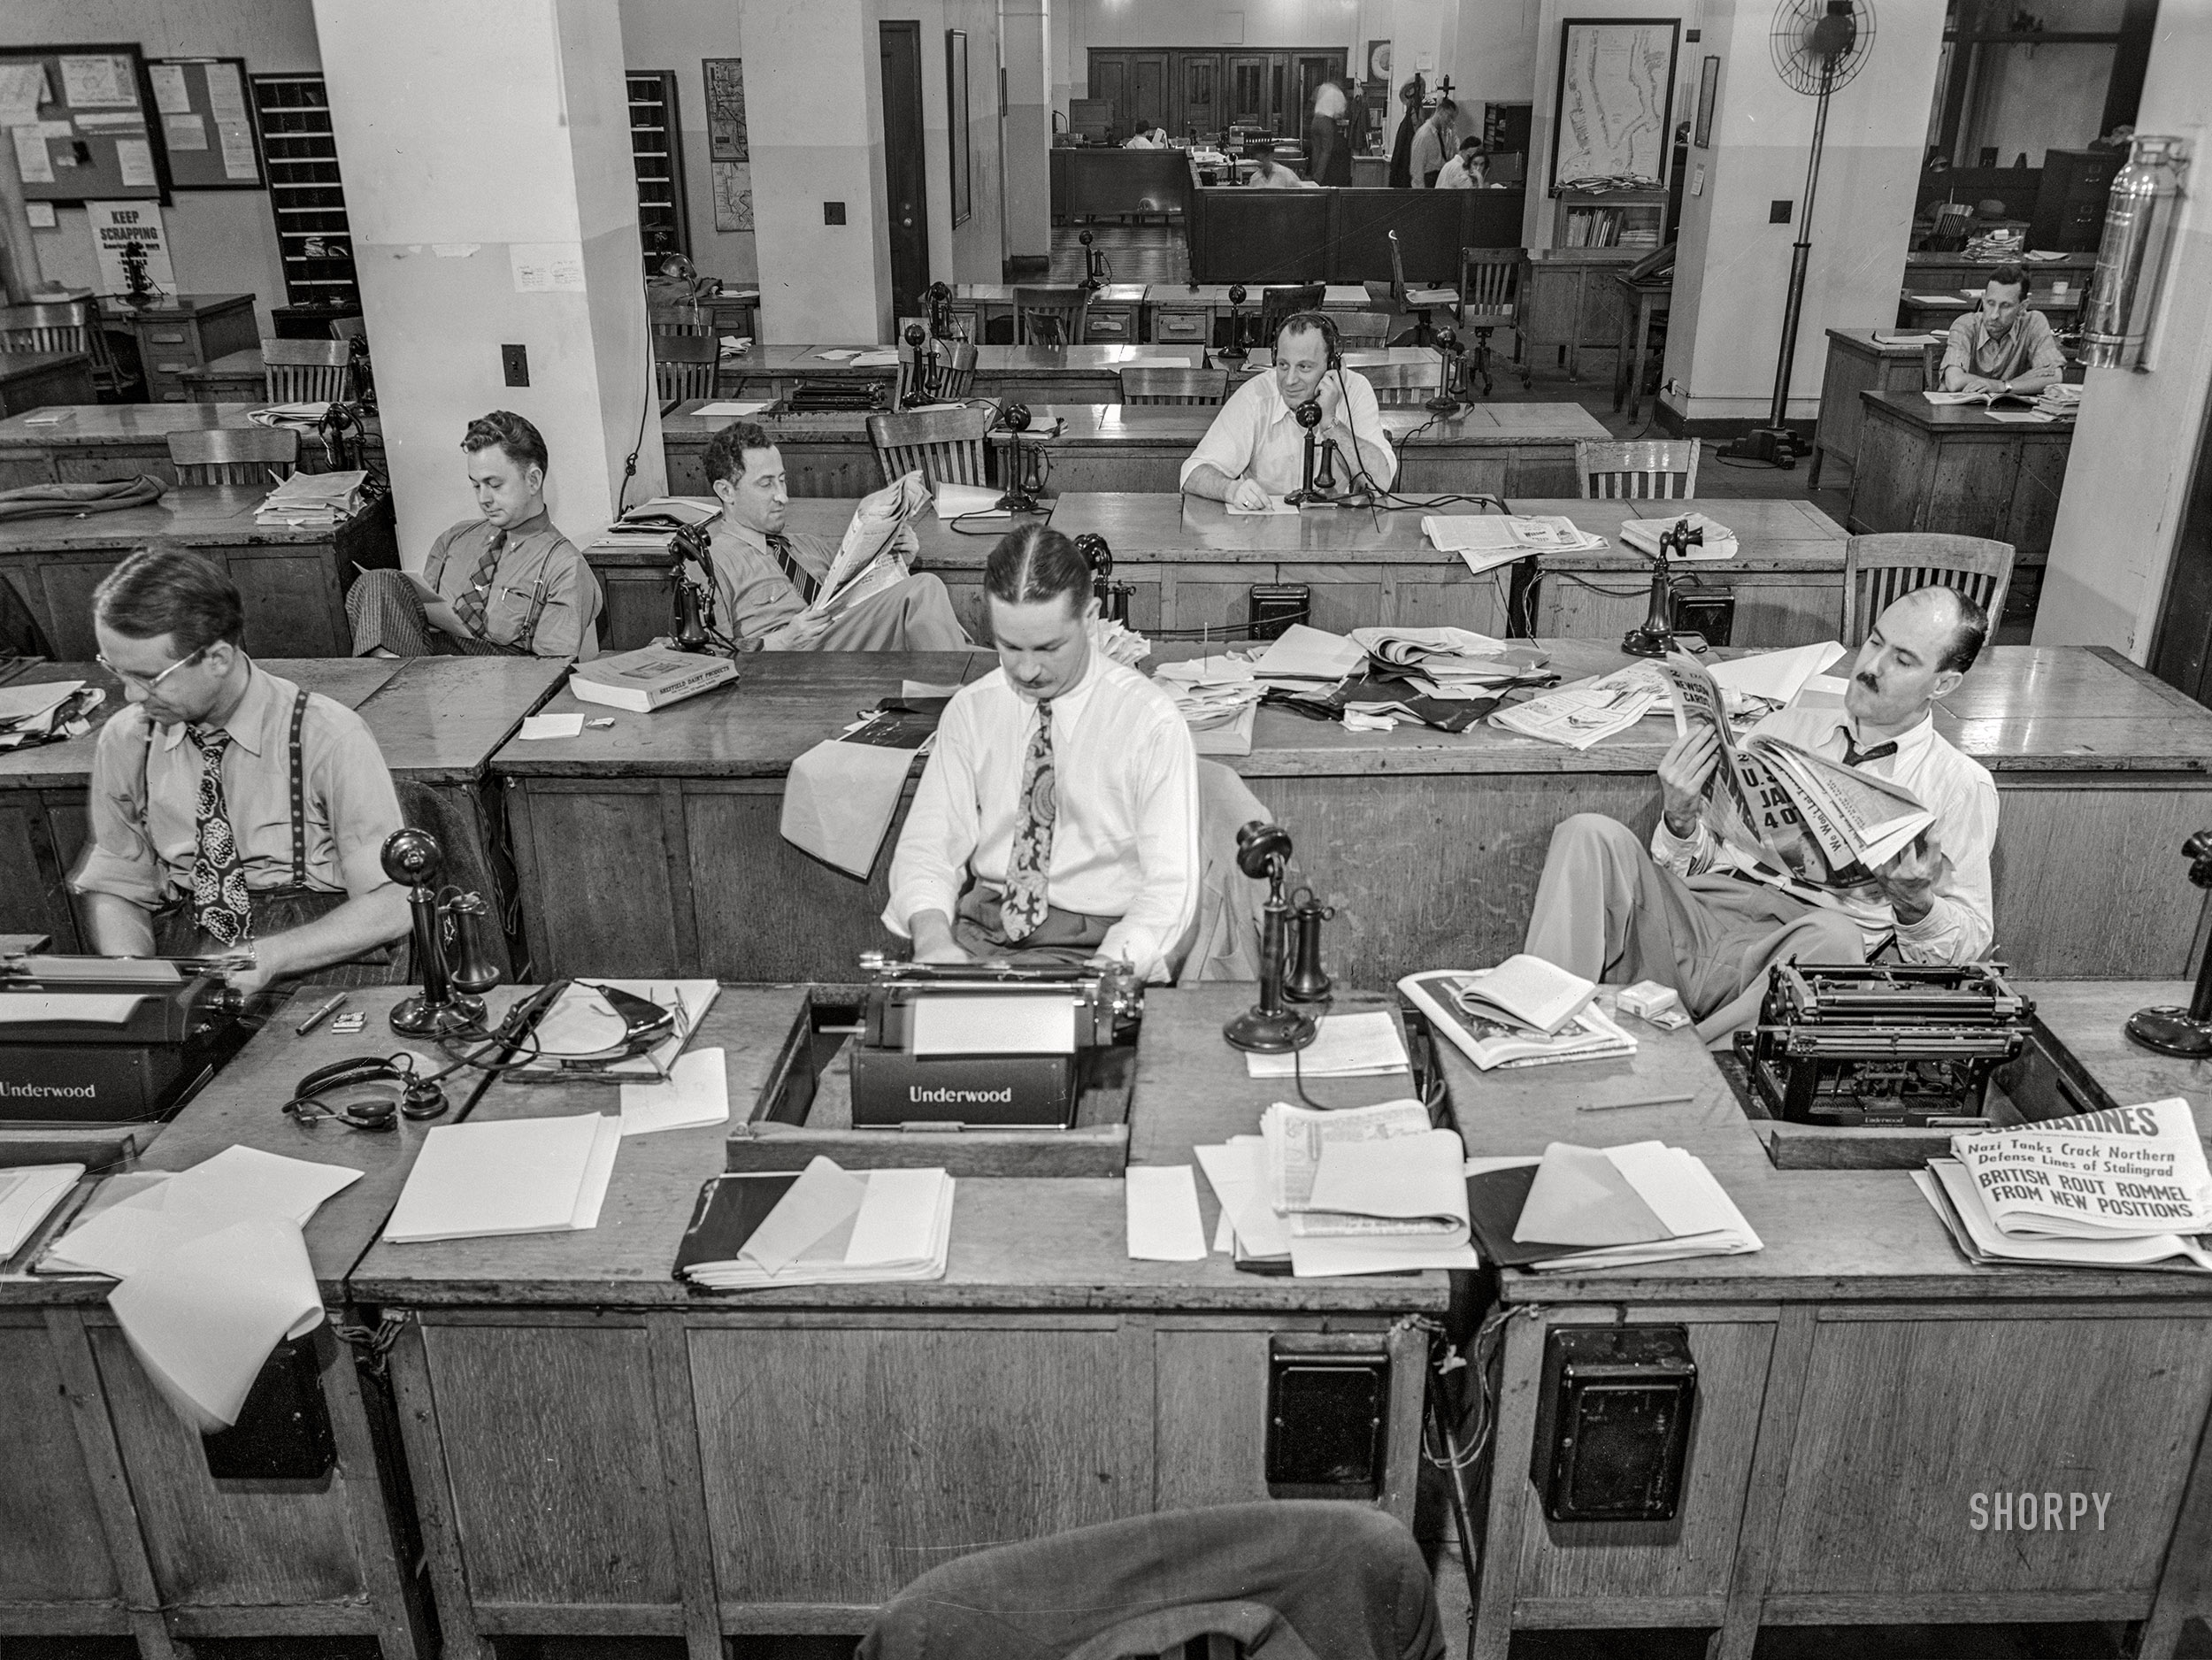 September 3, 1942. "New York, New York.  Newsroom of the New York Times newspaper. Reporters and rewrite men writing stories, and waiting to be sent out. Rewrite man in background gets the story on the phone from reporter outside." Medium format acetate negative by Marjory Collins for the Office of War Information. View full size.